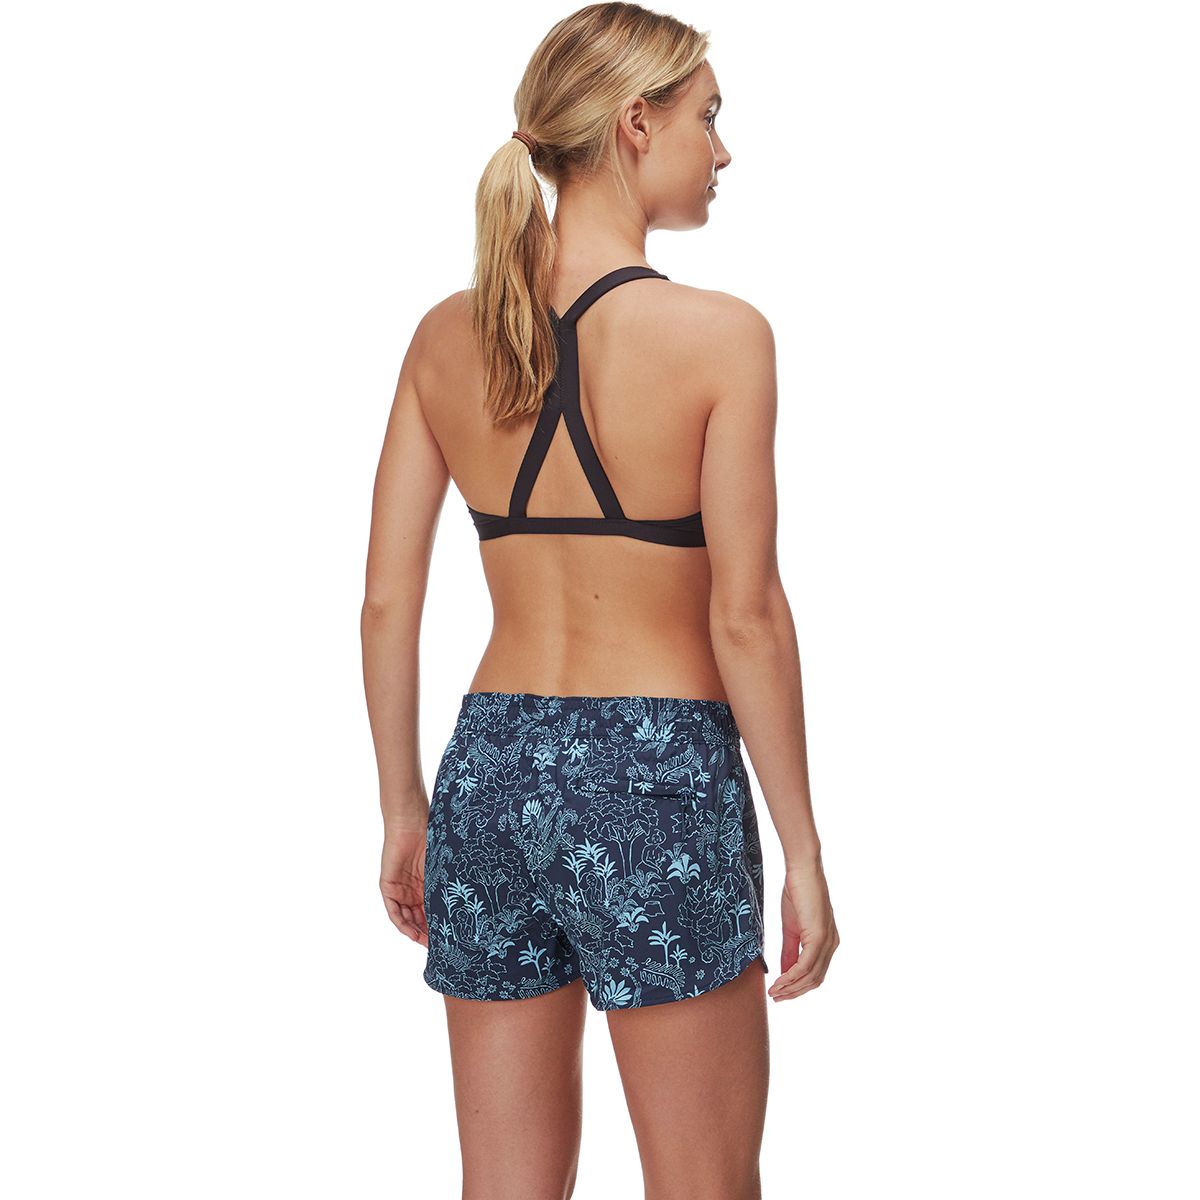 Patagonia Stretch Planing Micro Board Shorts - Women's